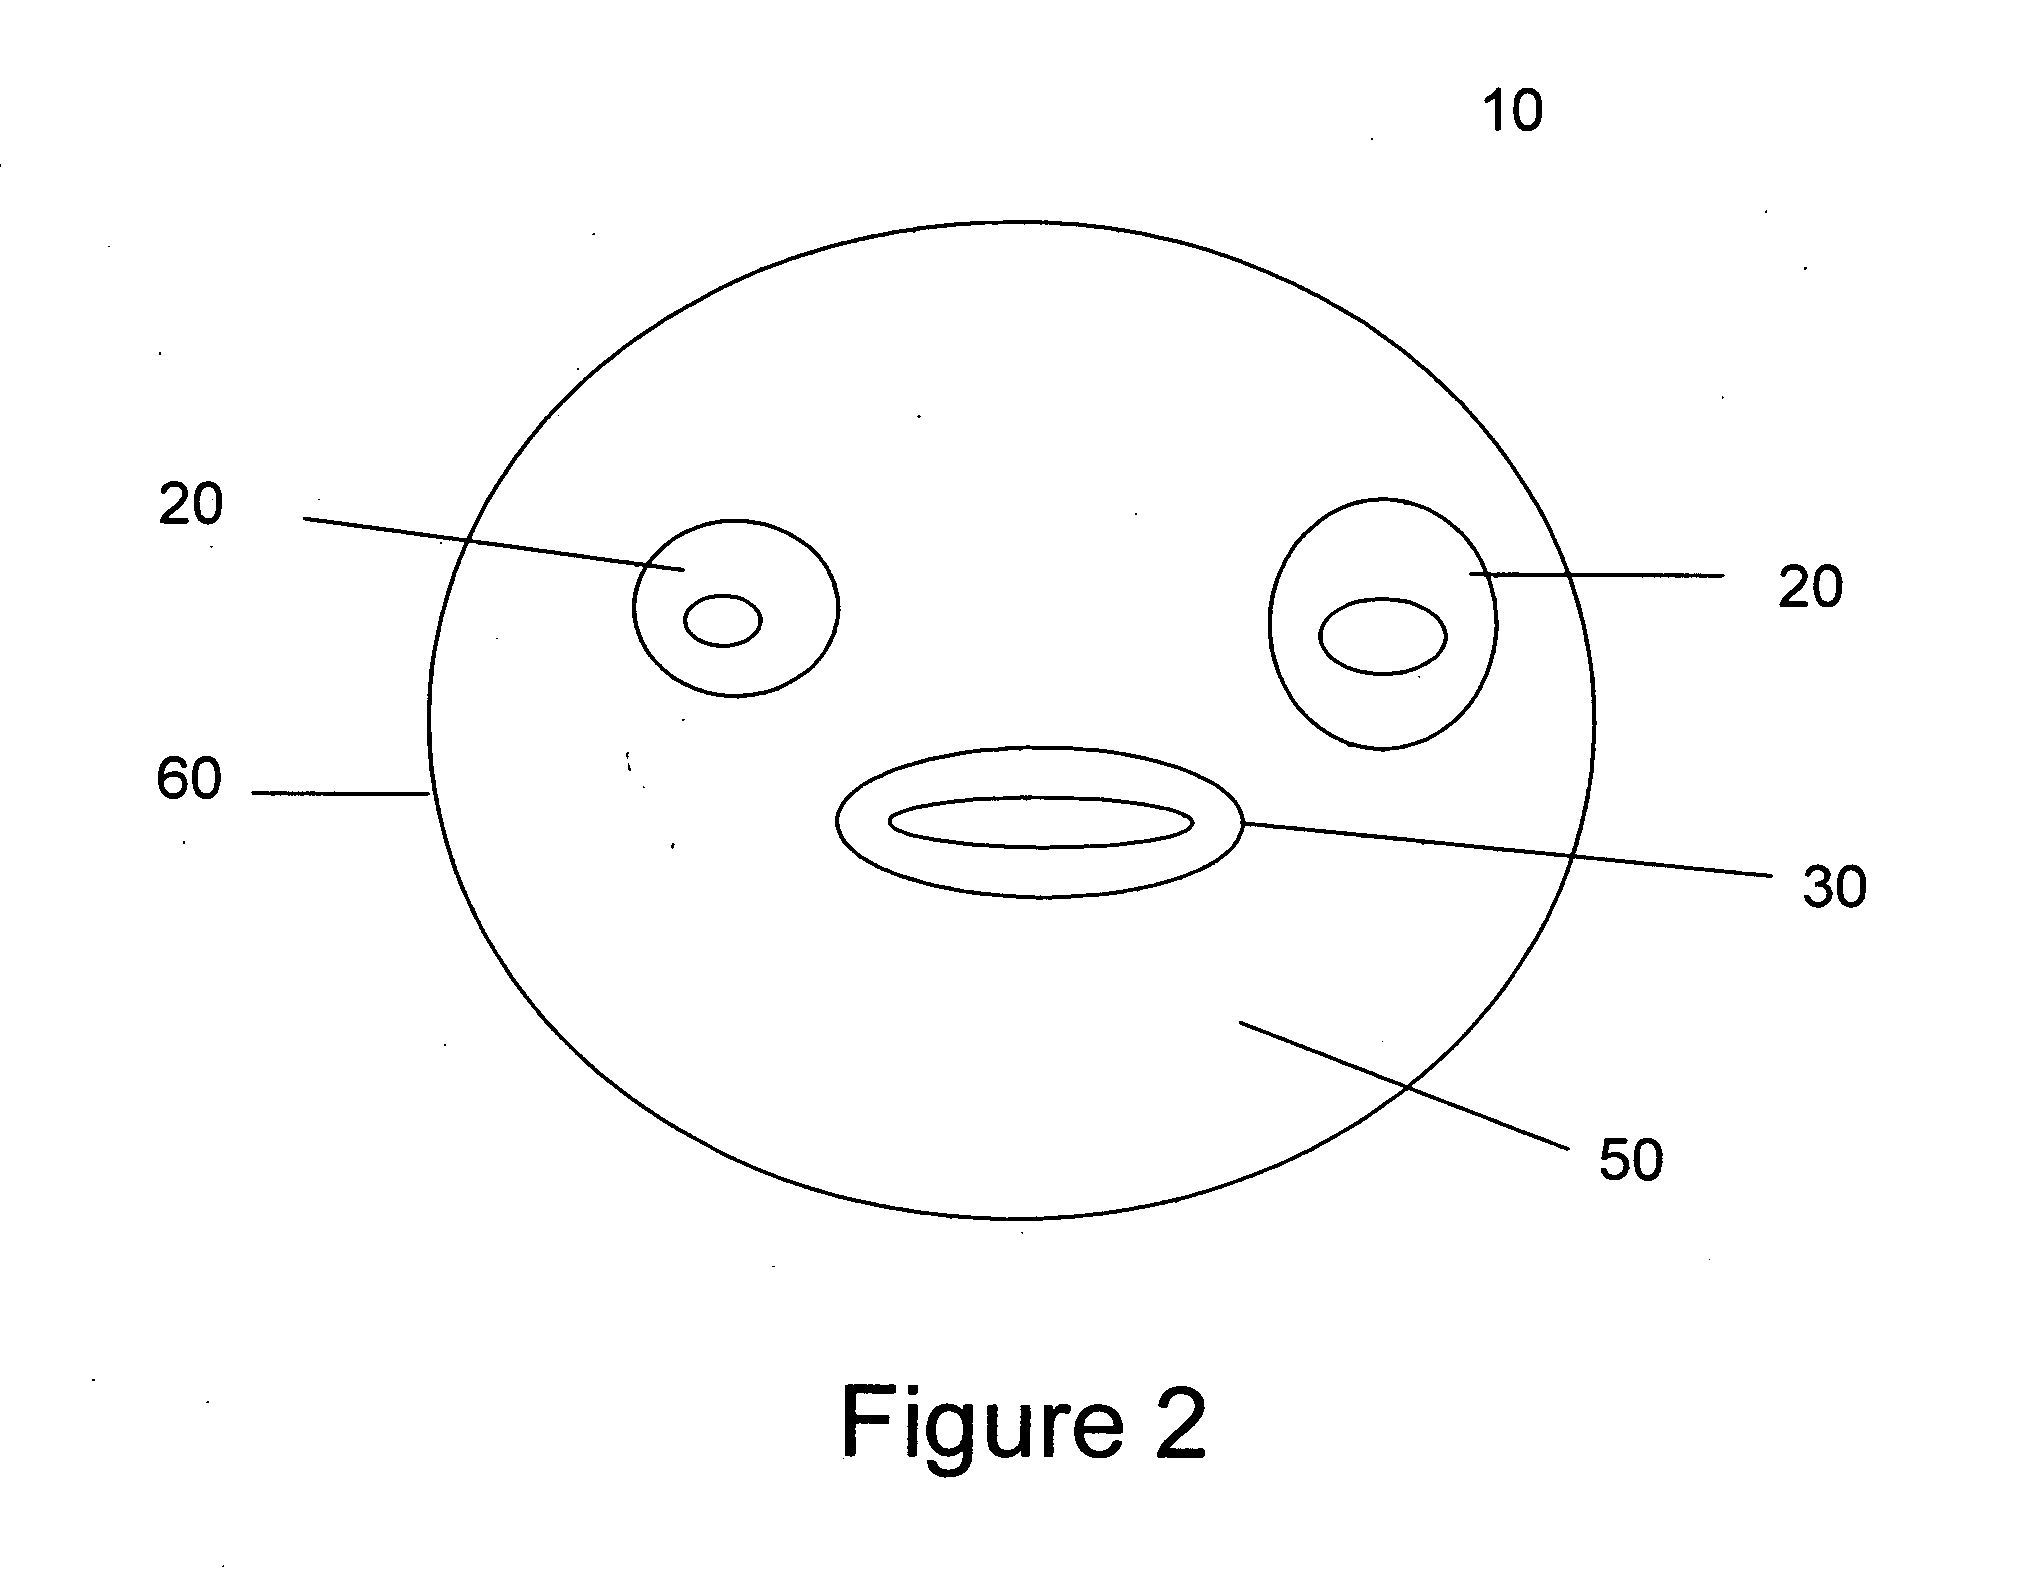 Umbilical cord sampling system and method